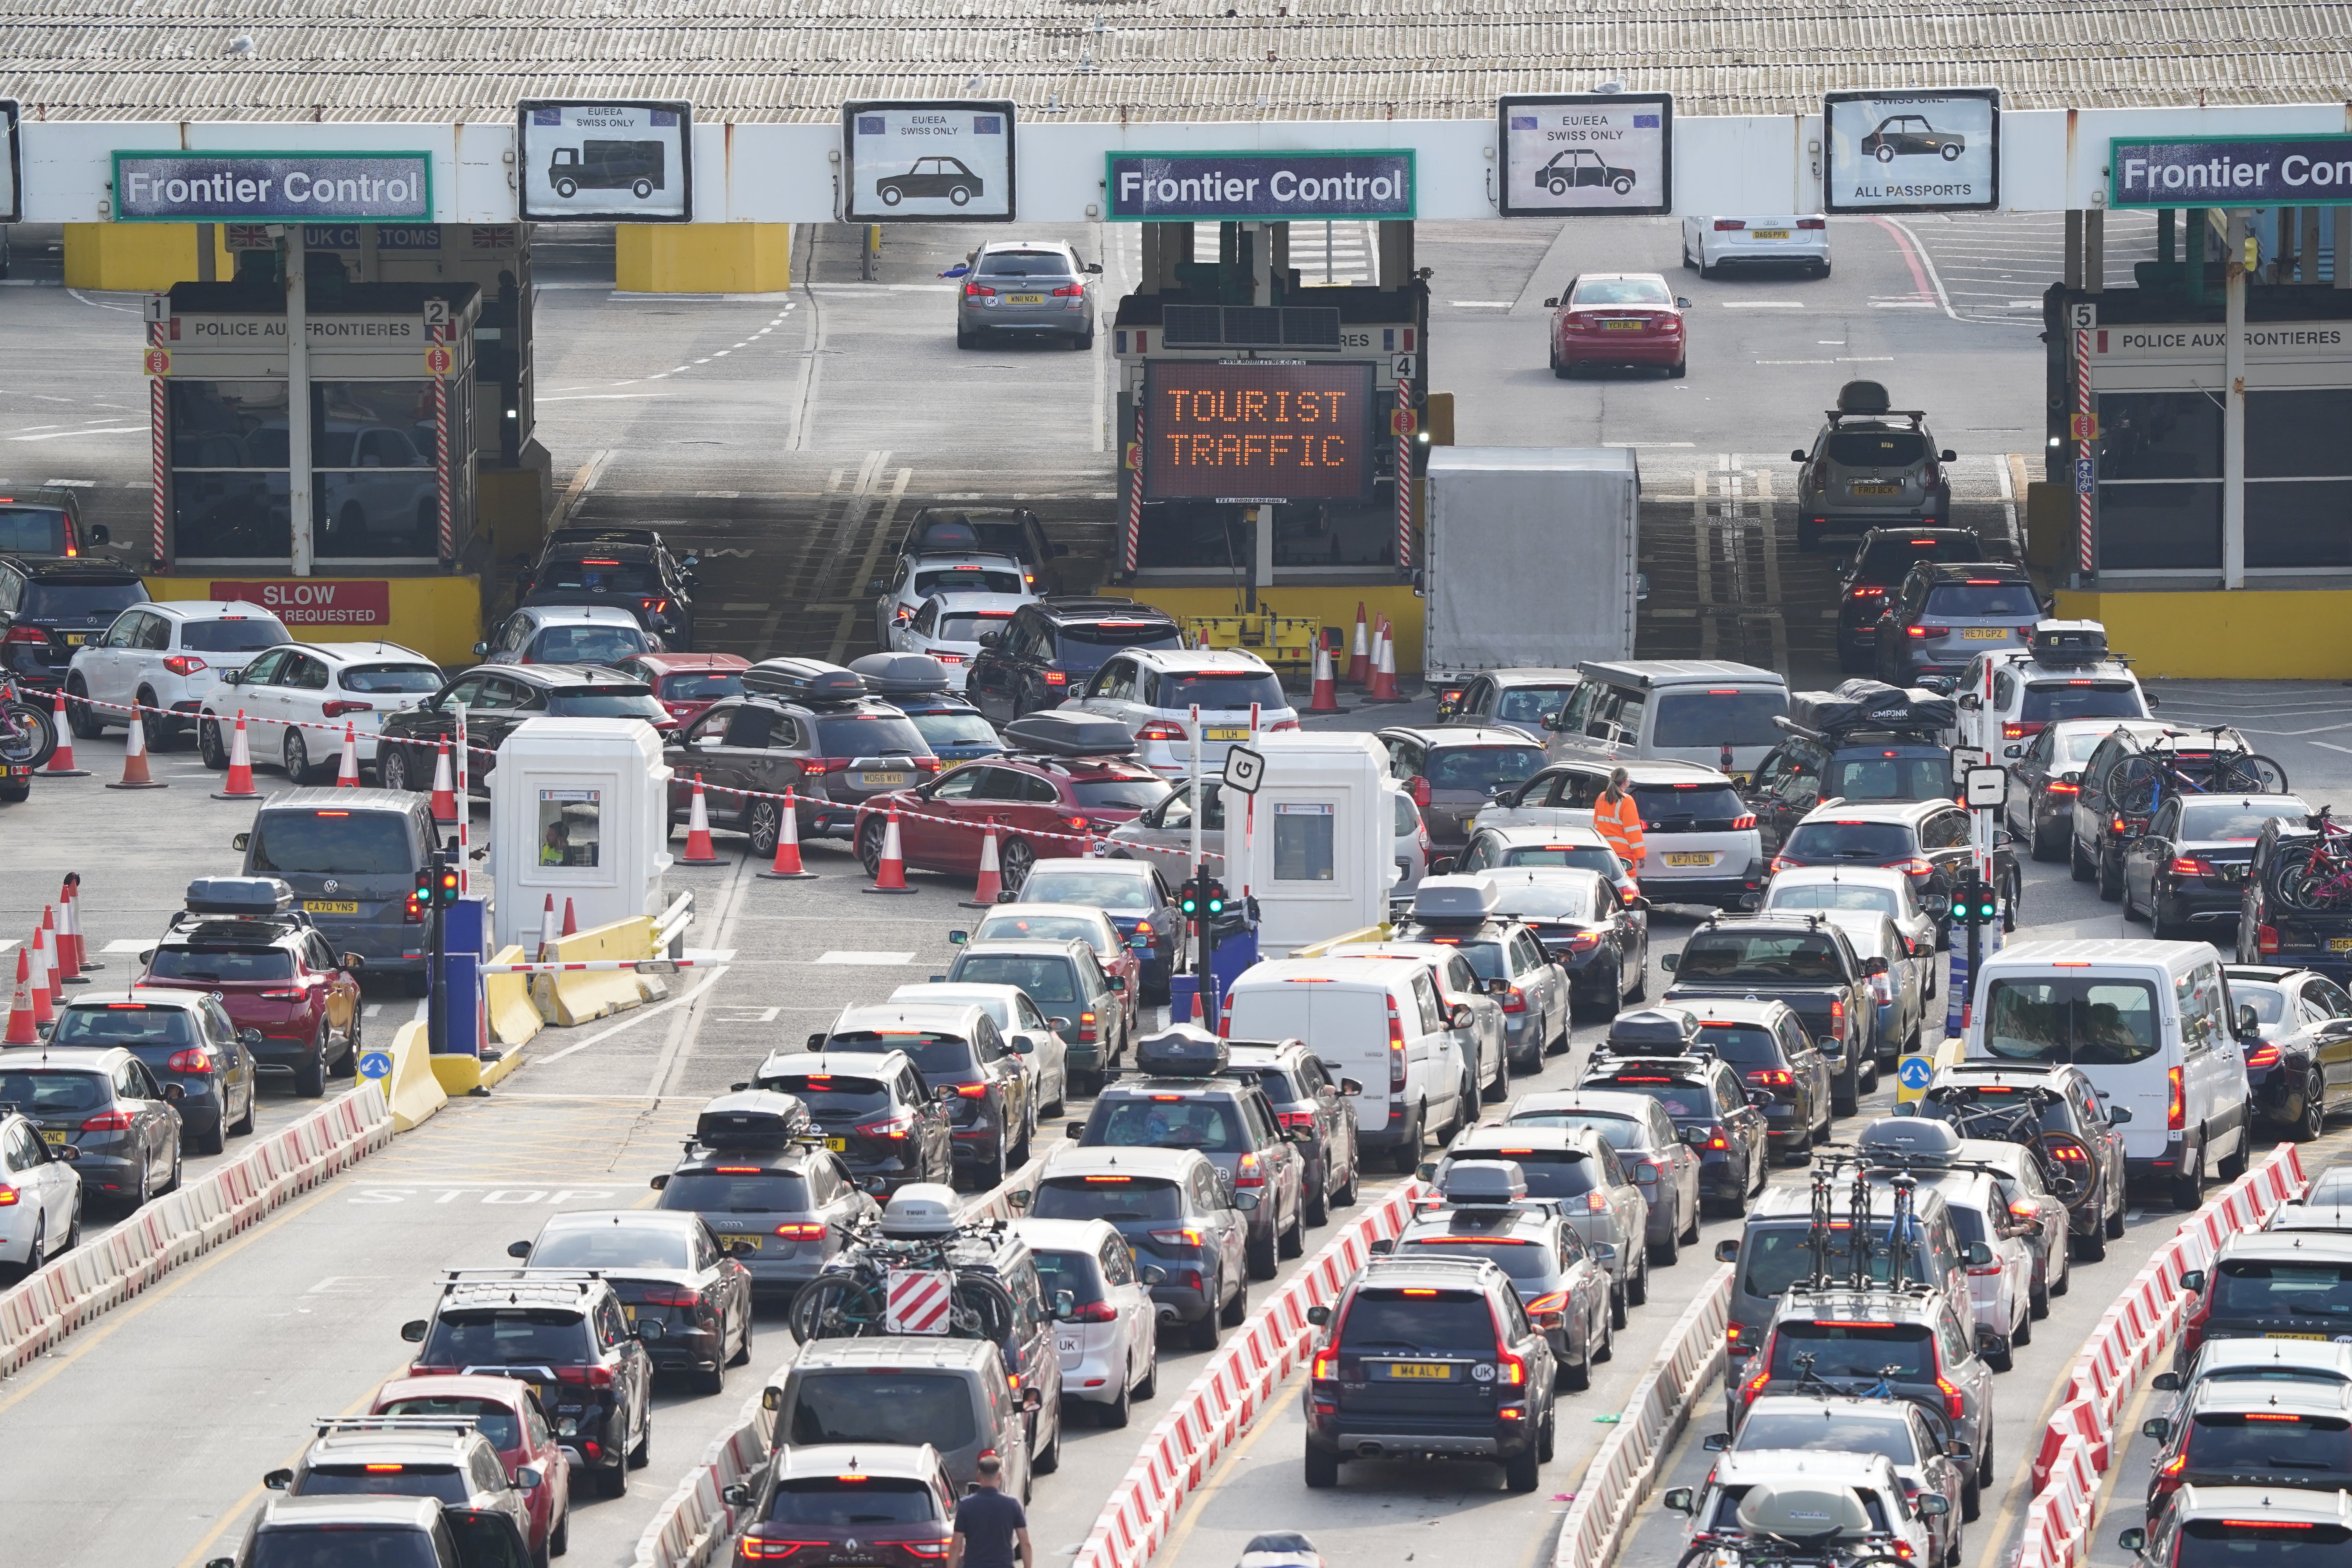 Roads to Port of Dover ‘flowing normally’ after days of traffic chaos (Gareth Fuller/PA)